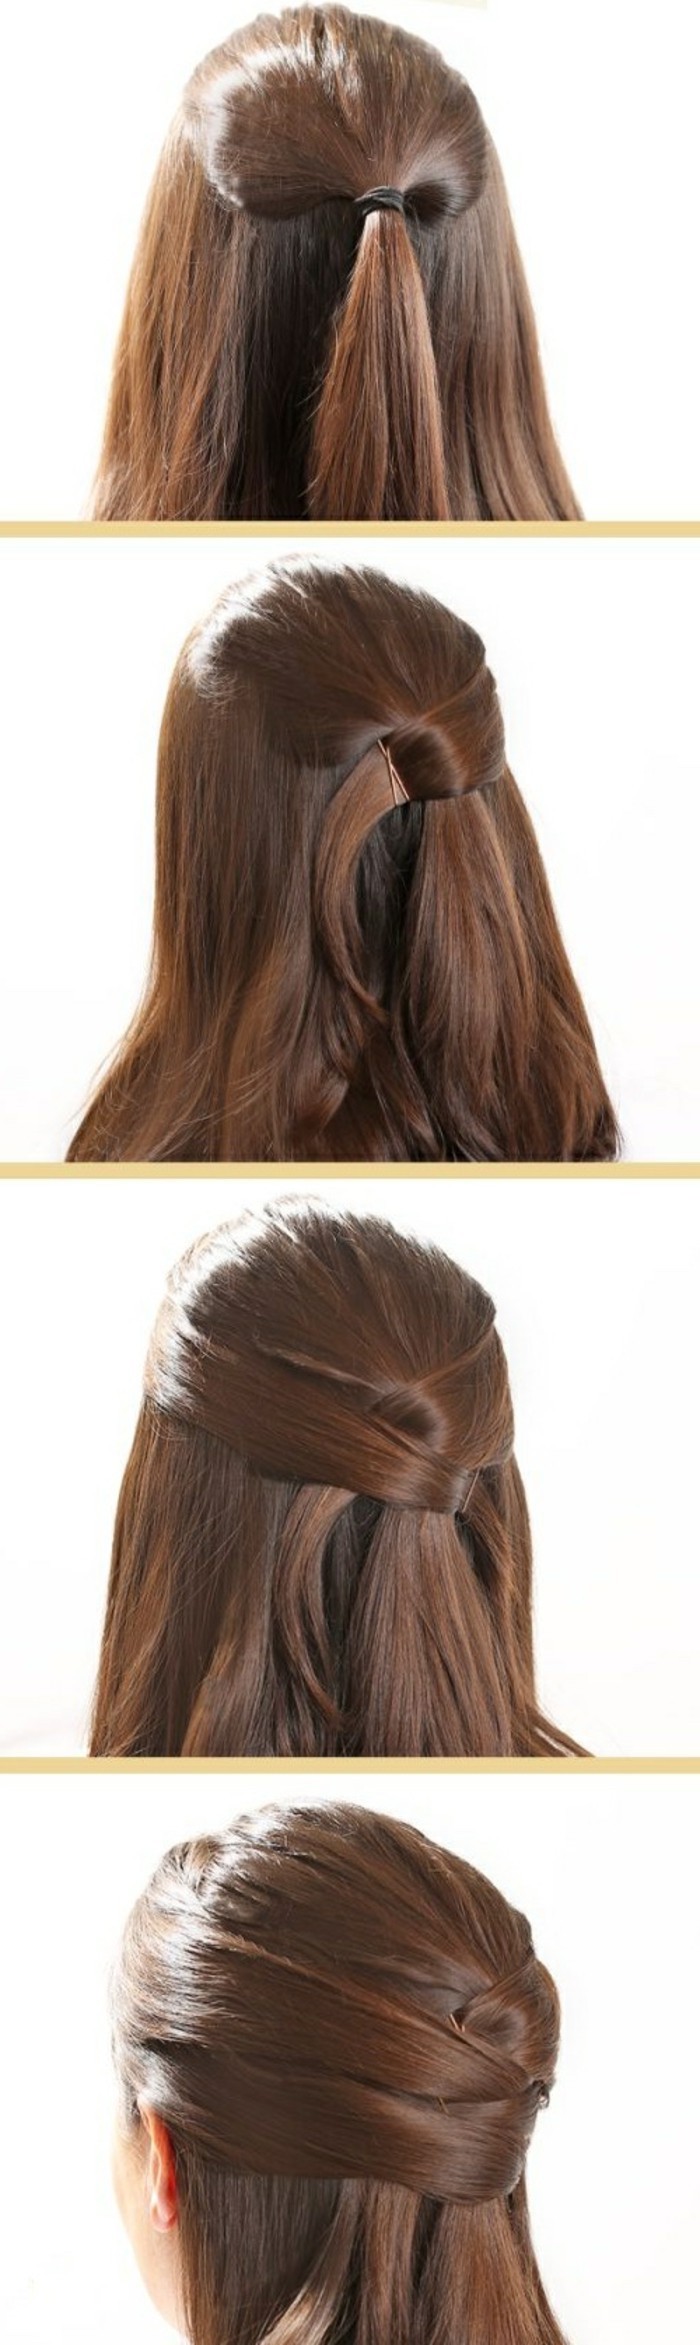 1001 + ideas for beautiful hairstyles + diy instructions